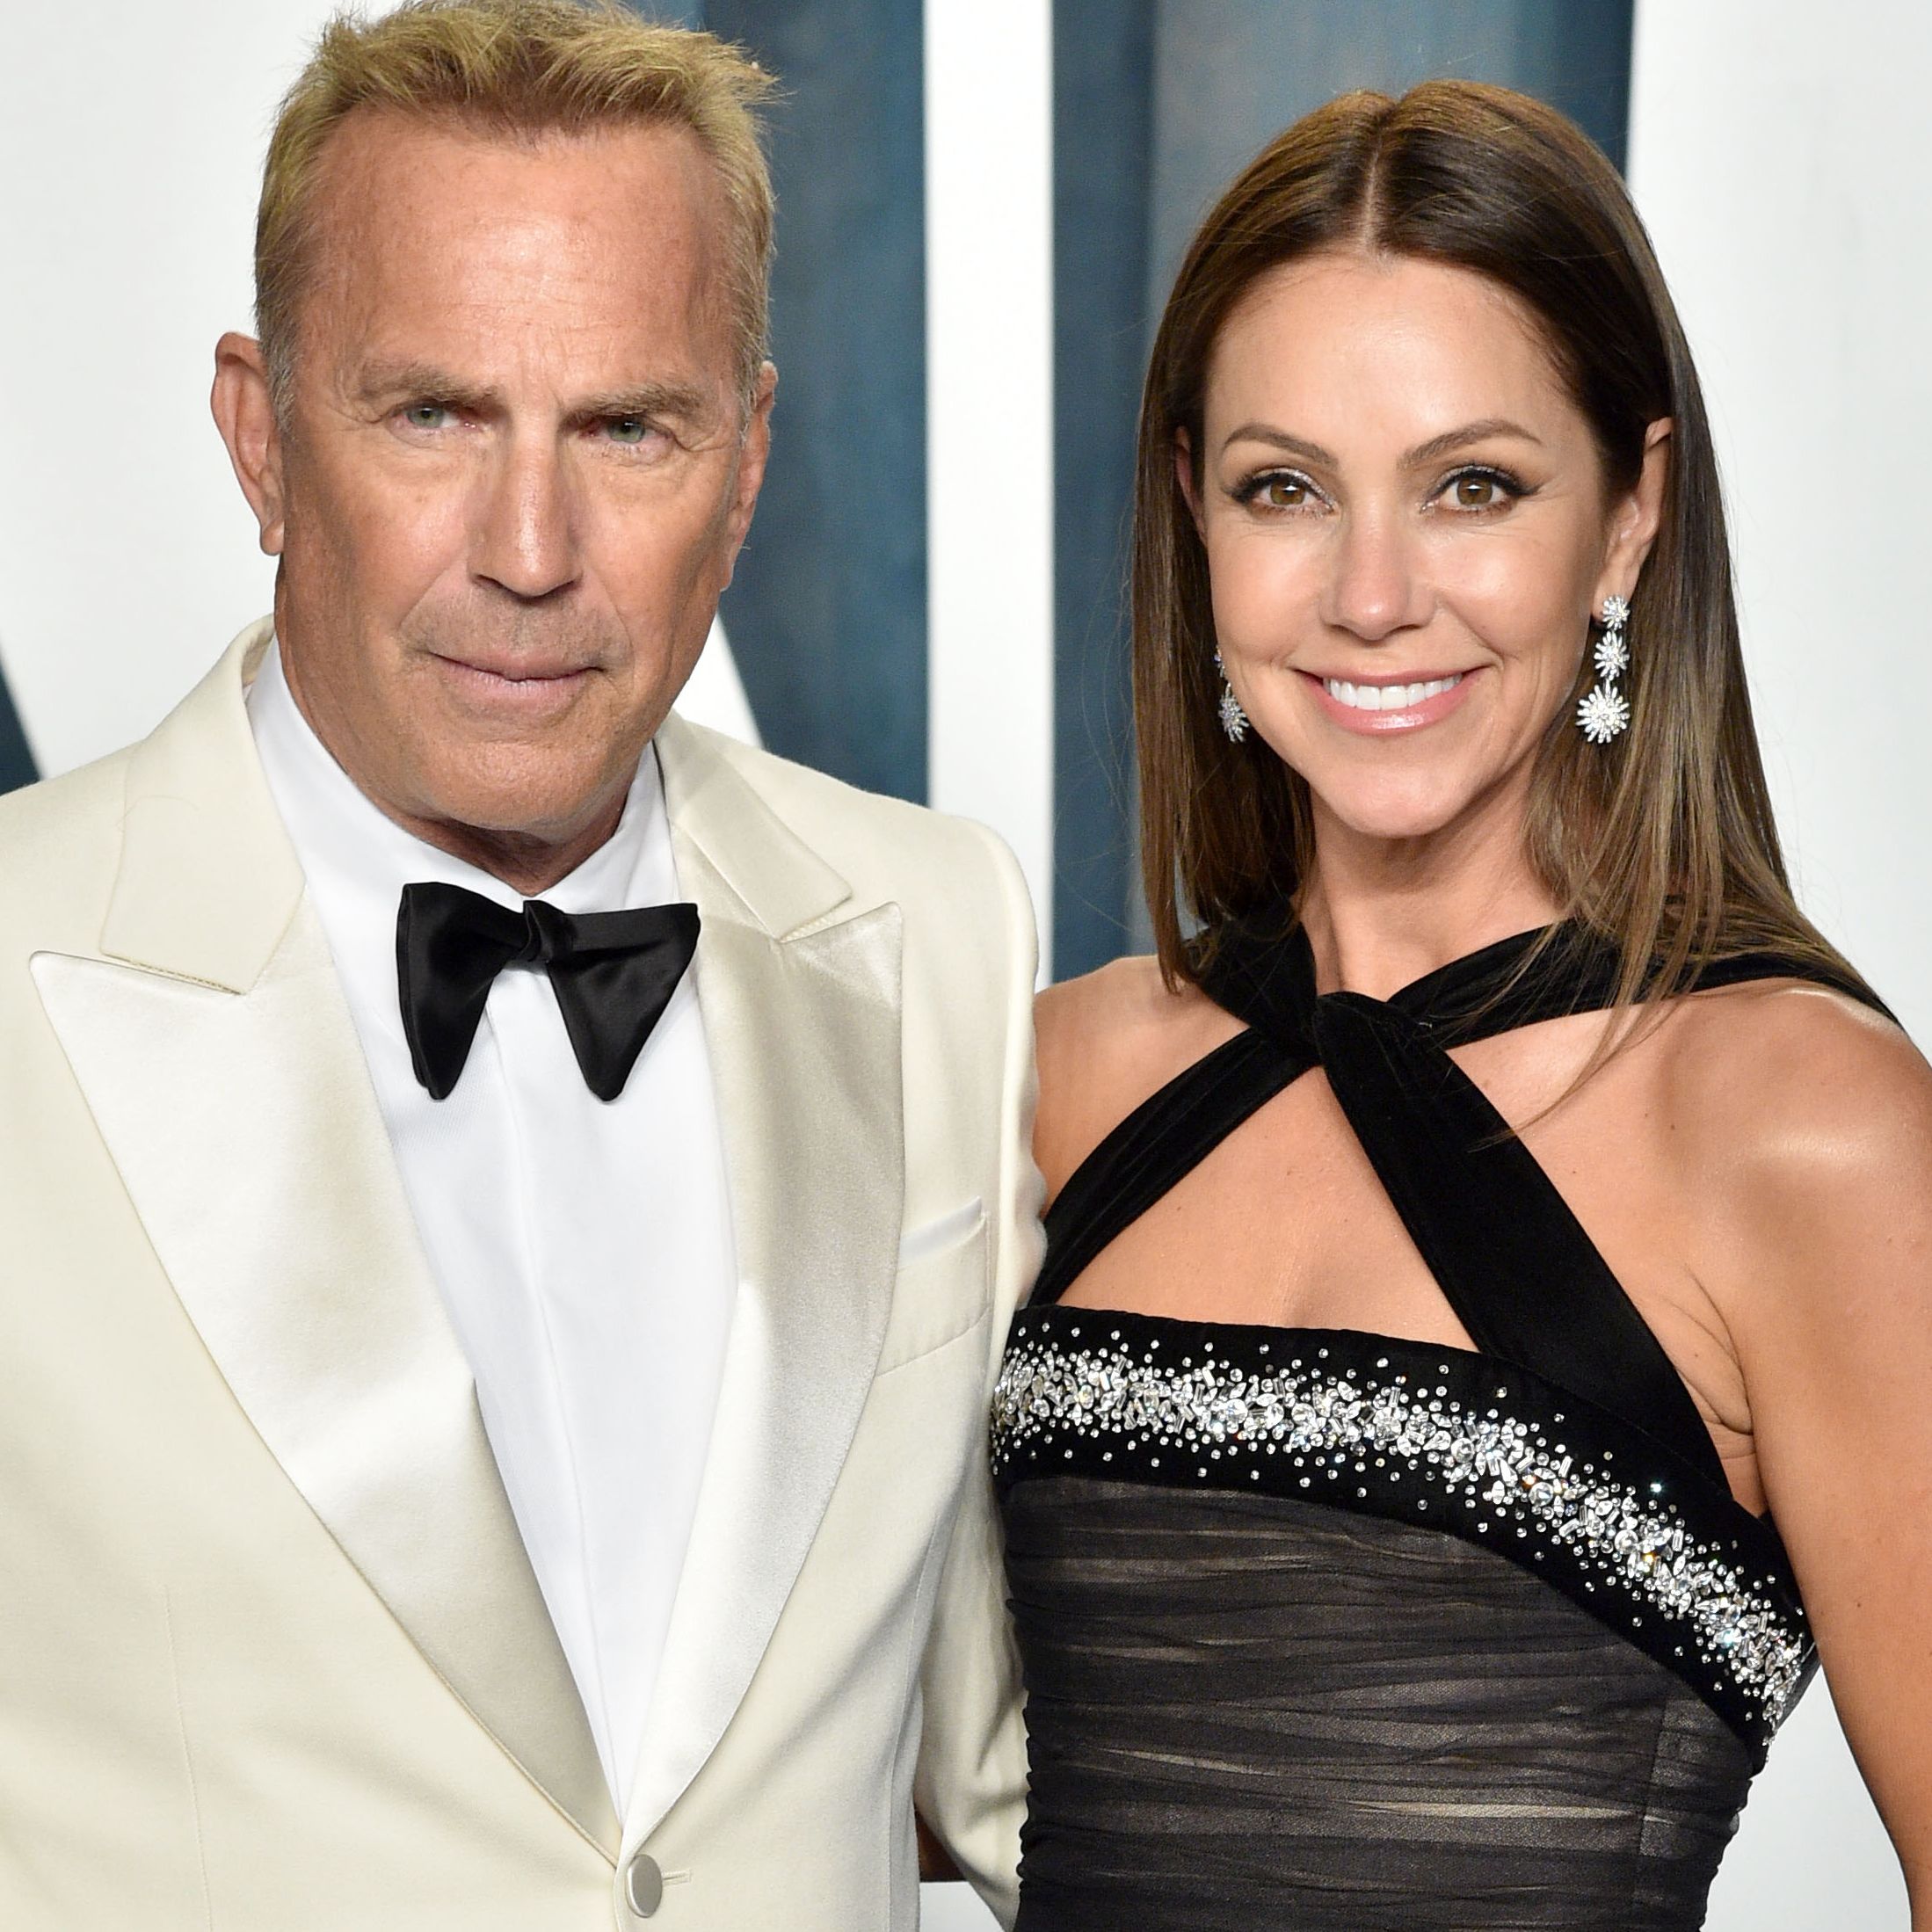 Kevin Costner On Why He Doesn’t Want His Wife Or Kids To See 'Yellowstone' Season 5